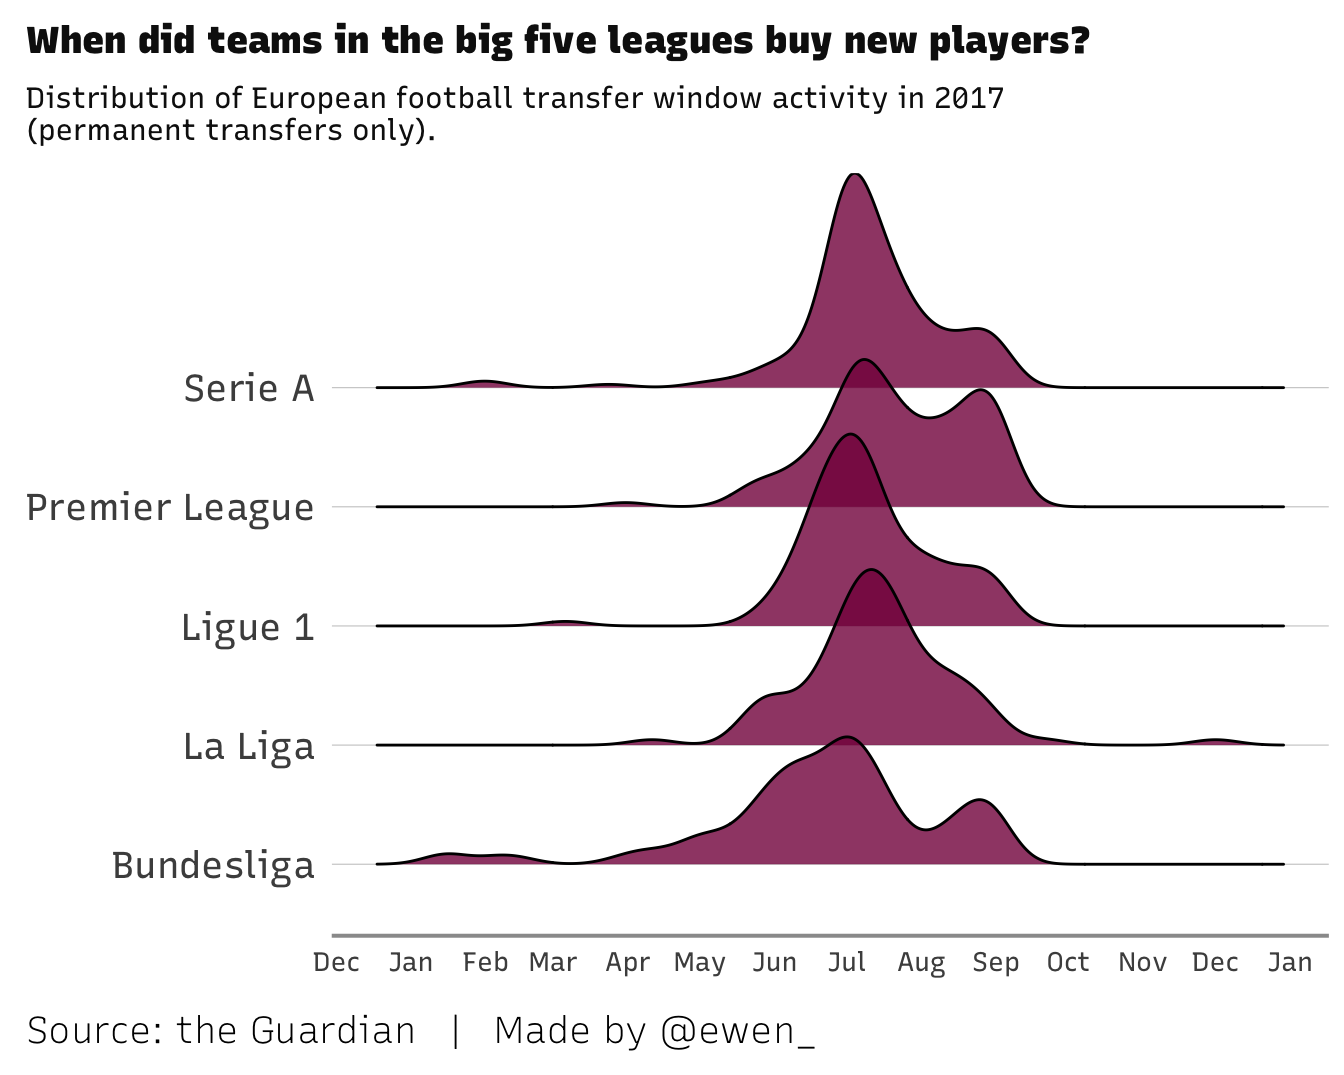 Chart showing distribution of transfer window activity over time, by league